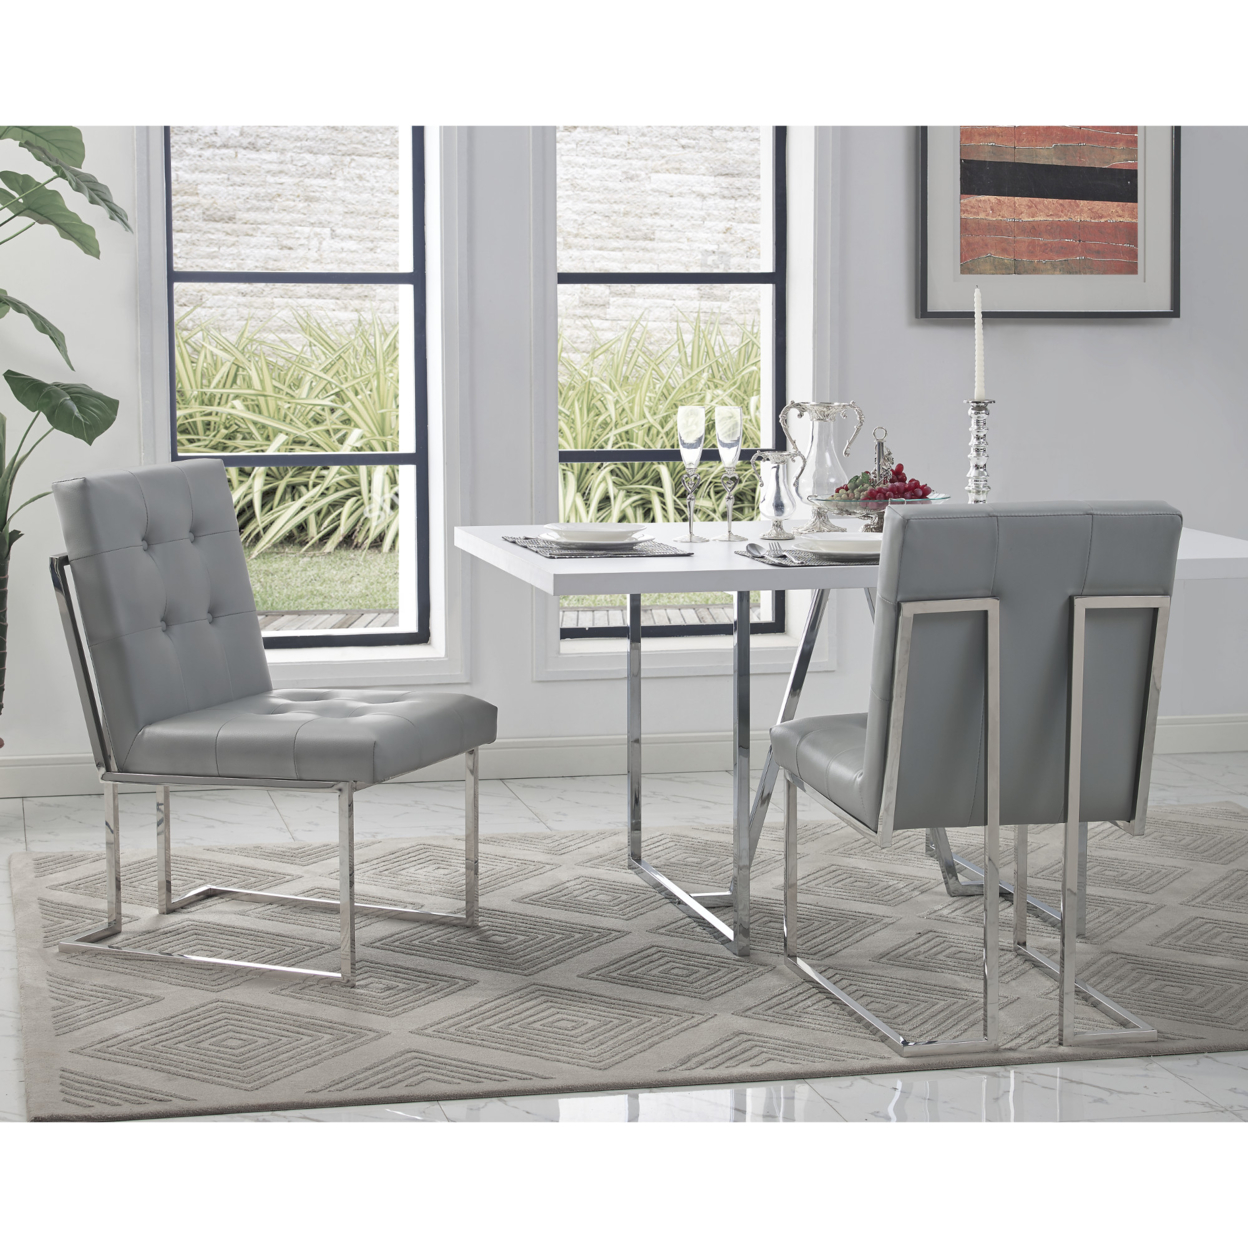 Cecille PU Leather Or Velvet Armless Dining Chair-Set Of 2-Chrome - Gold Frame-Button Tufted-Modern & Functional By Inspired Home - White PU